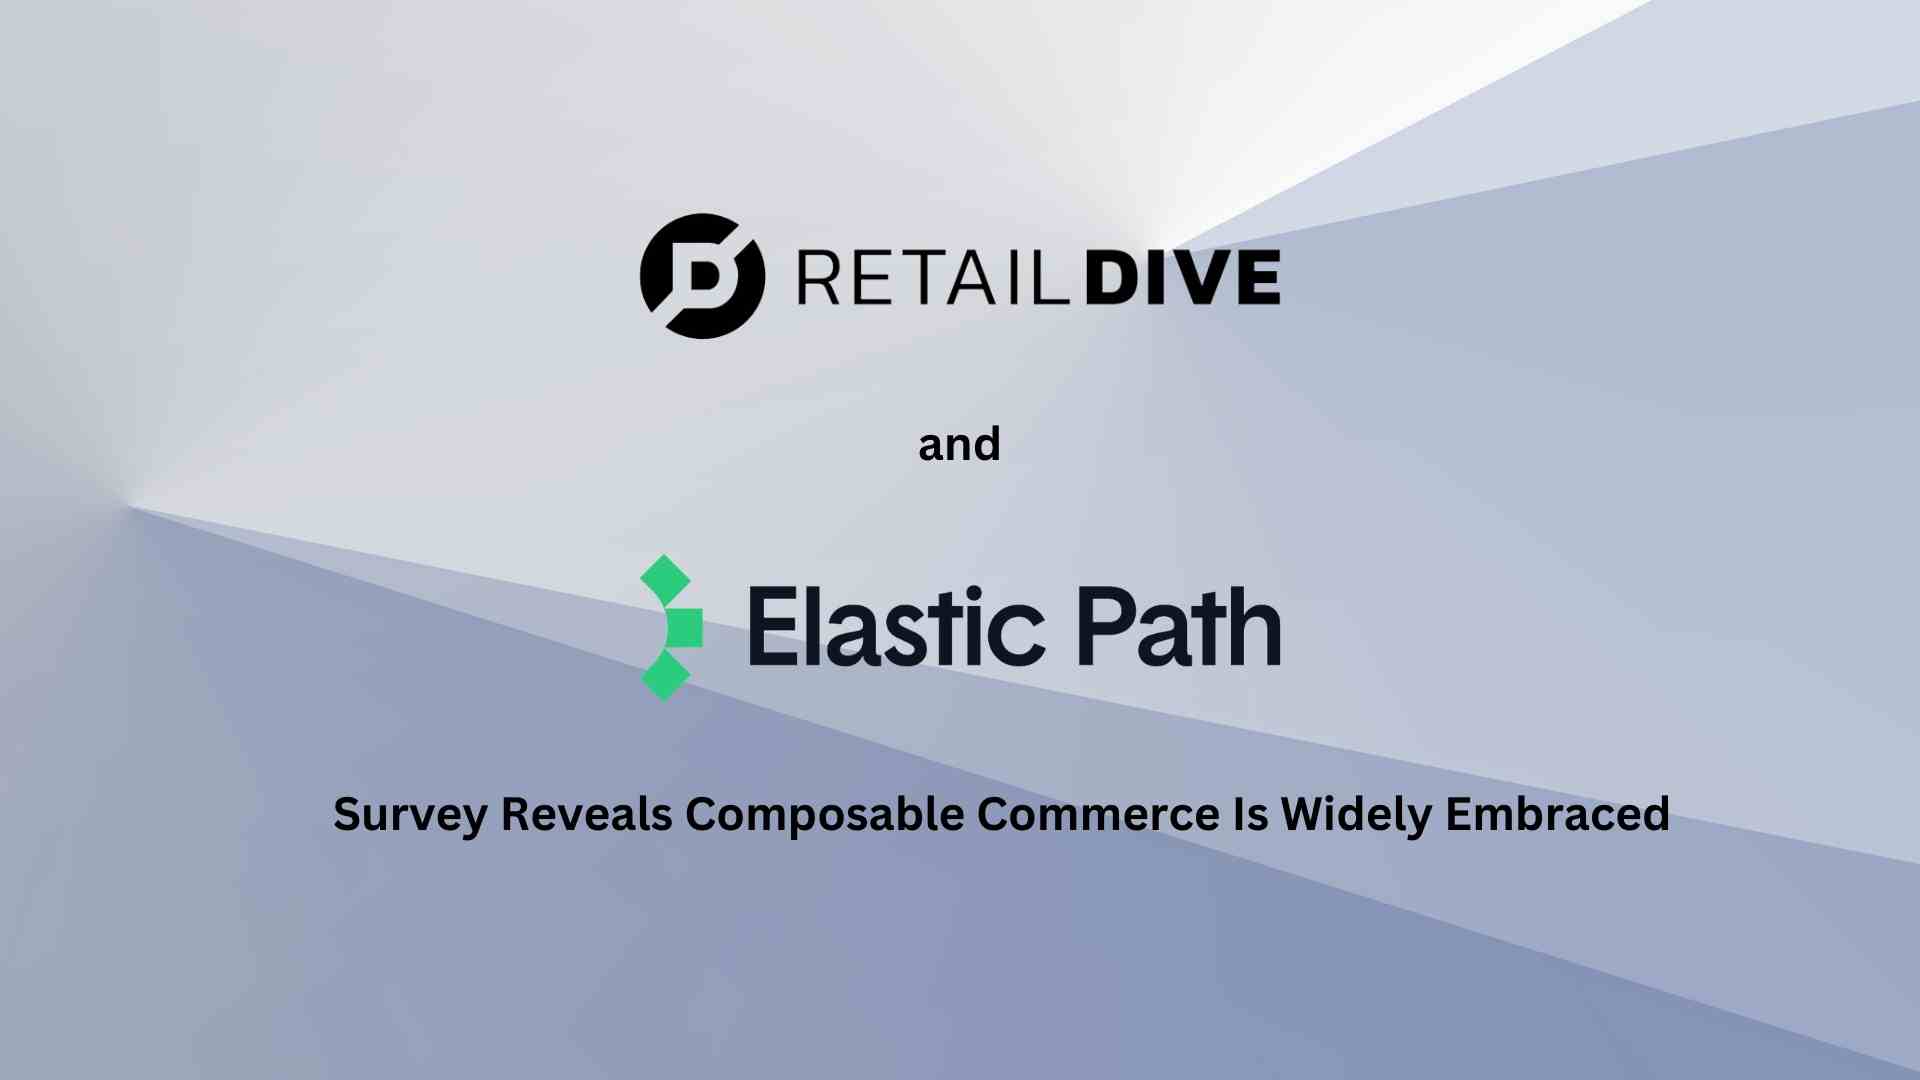 Retail Dive and Elastic Path Survey Reveals Composable Commerce is Widely Embraced, But Brands Still Struggle To Launch Integrations